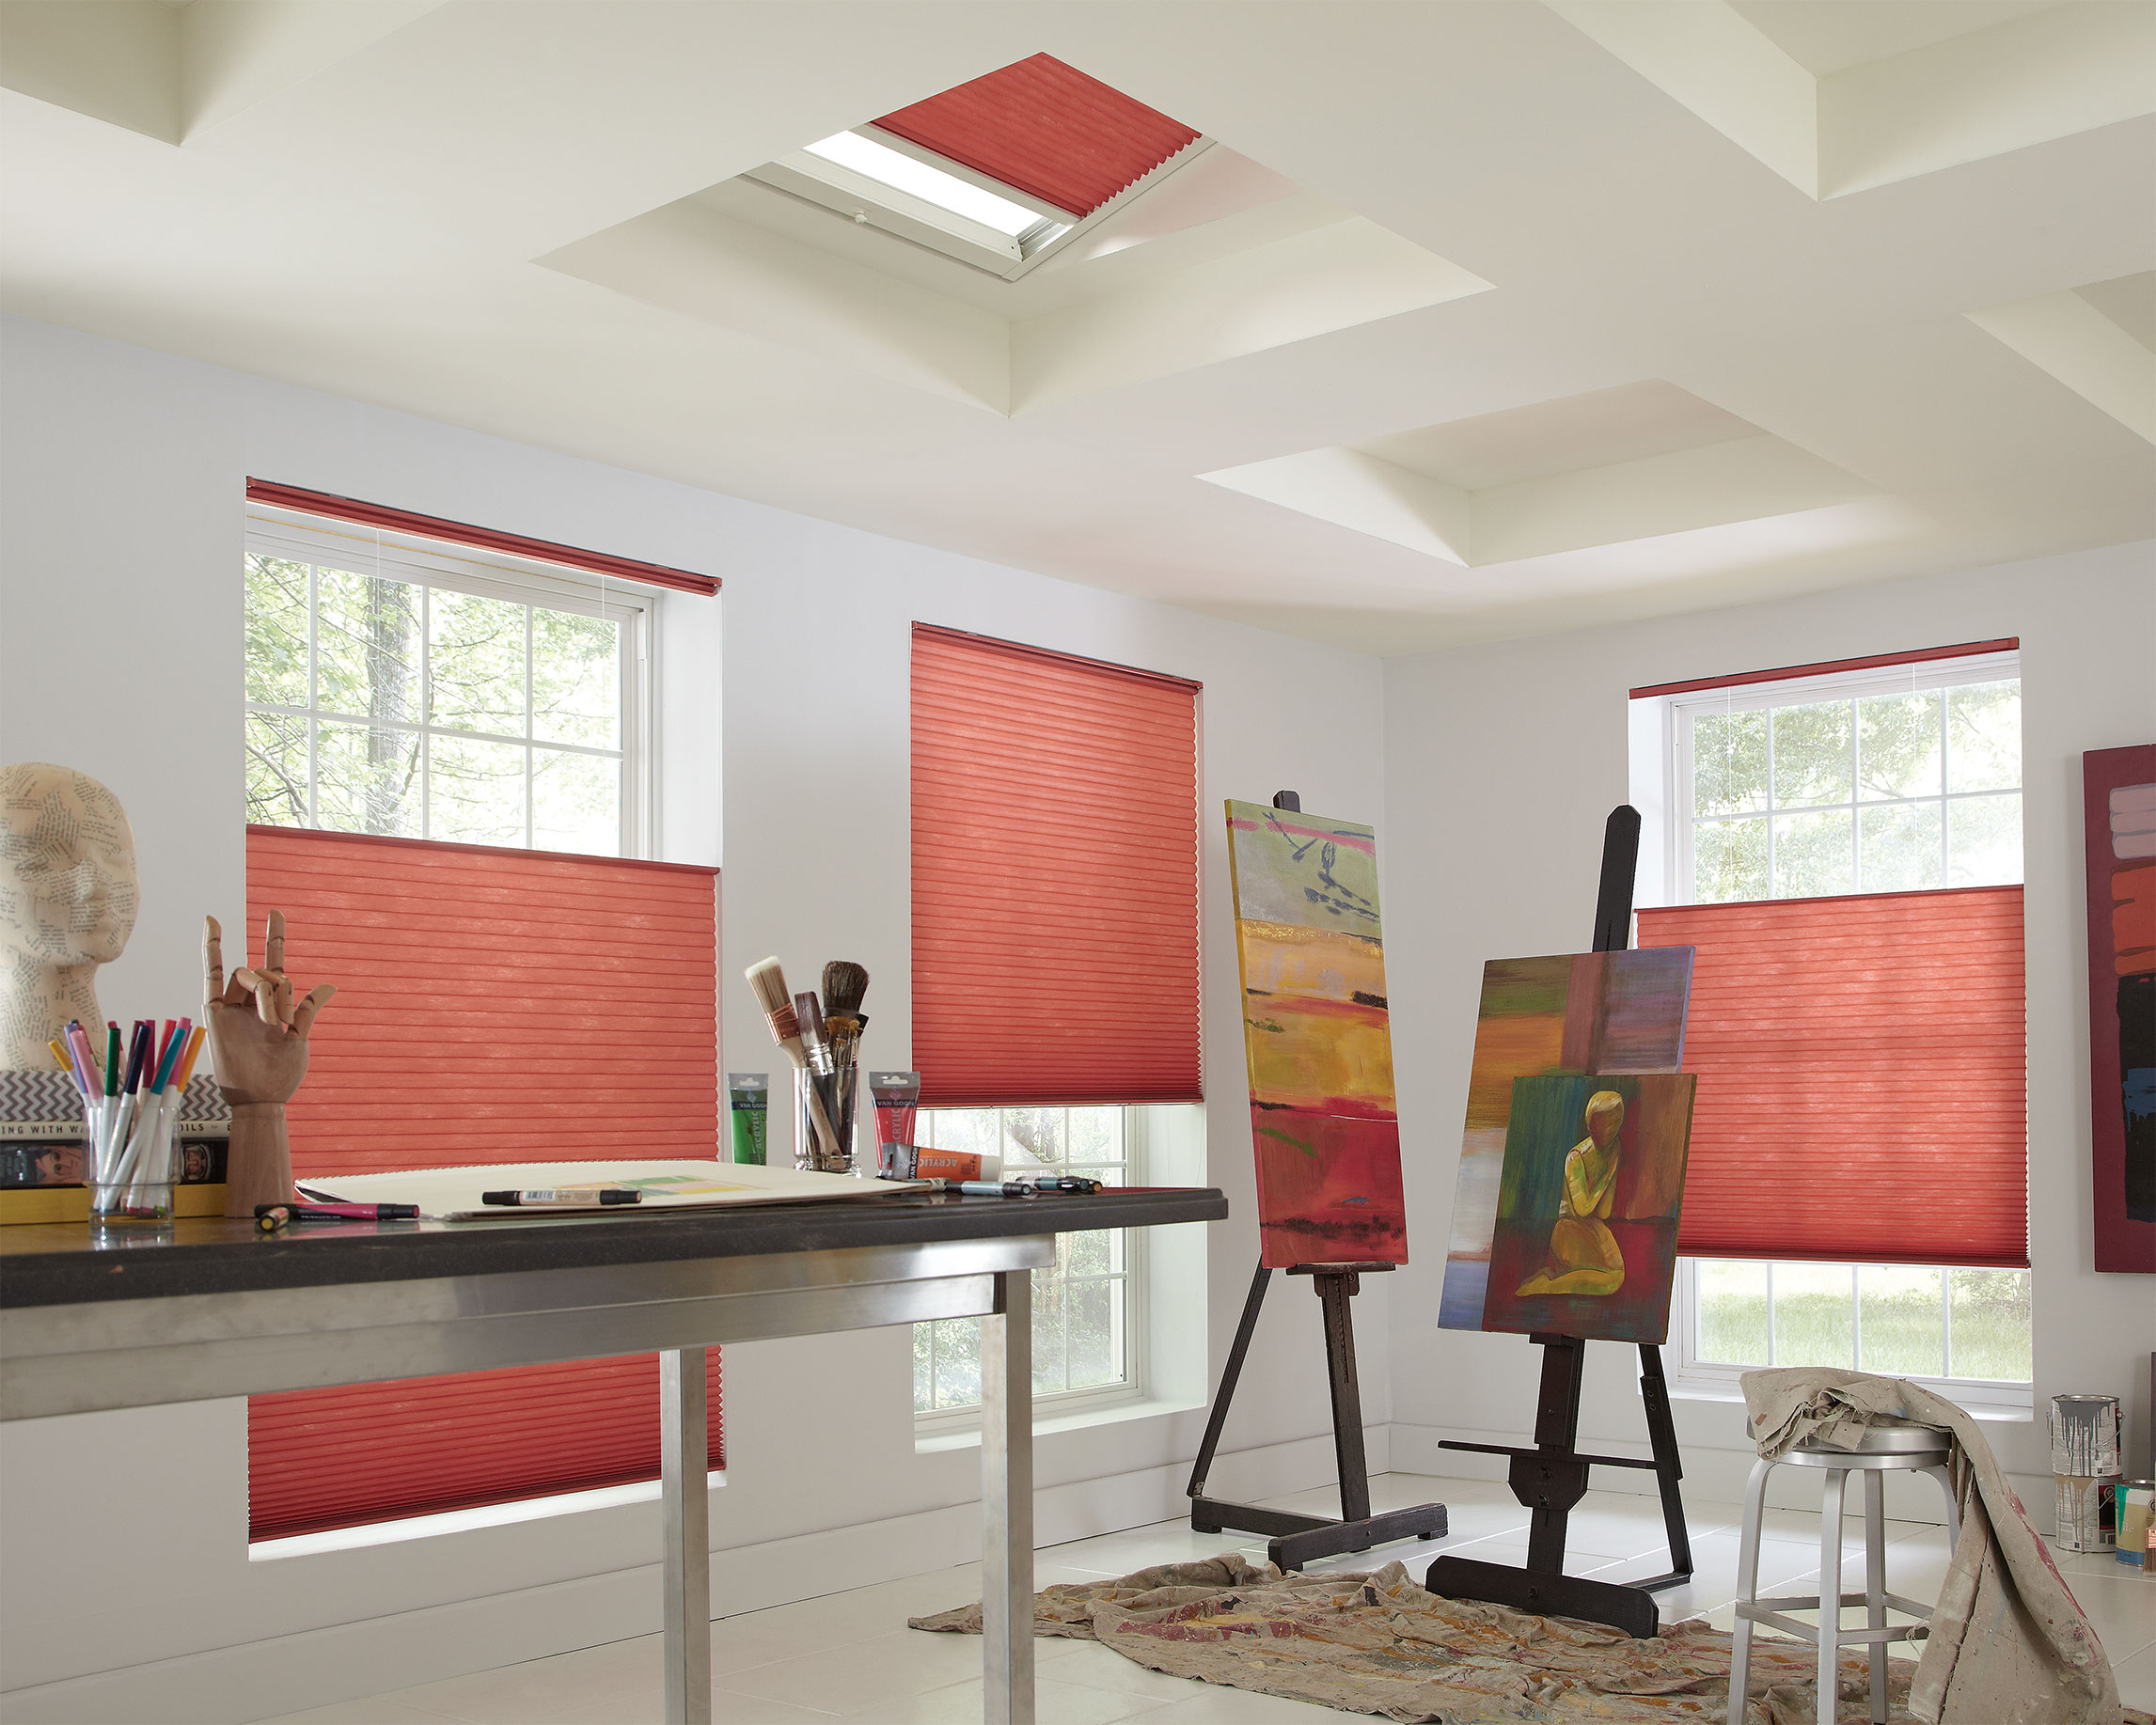 Bright rose colored cellular shades hang in three large windows and the skylights of an artist's studio featuring bright paintings and tarps.